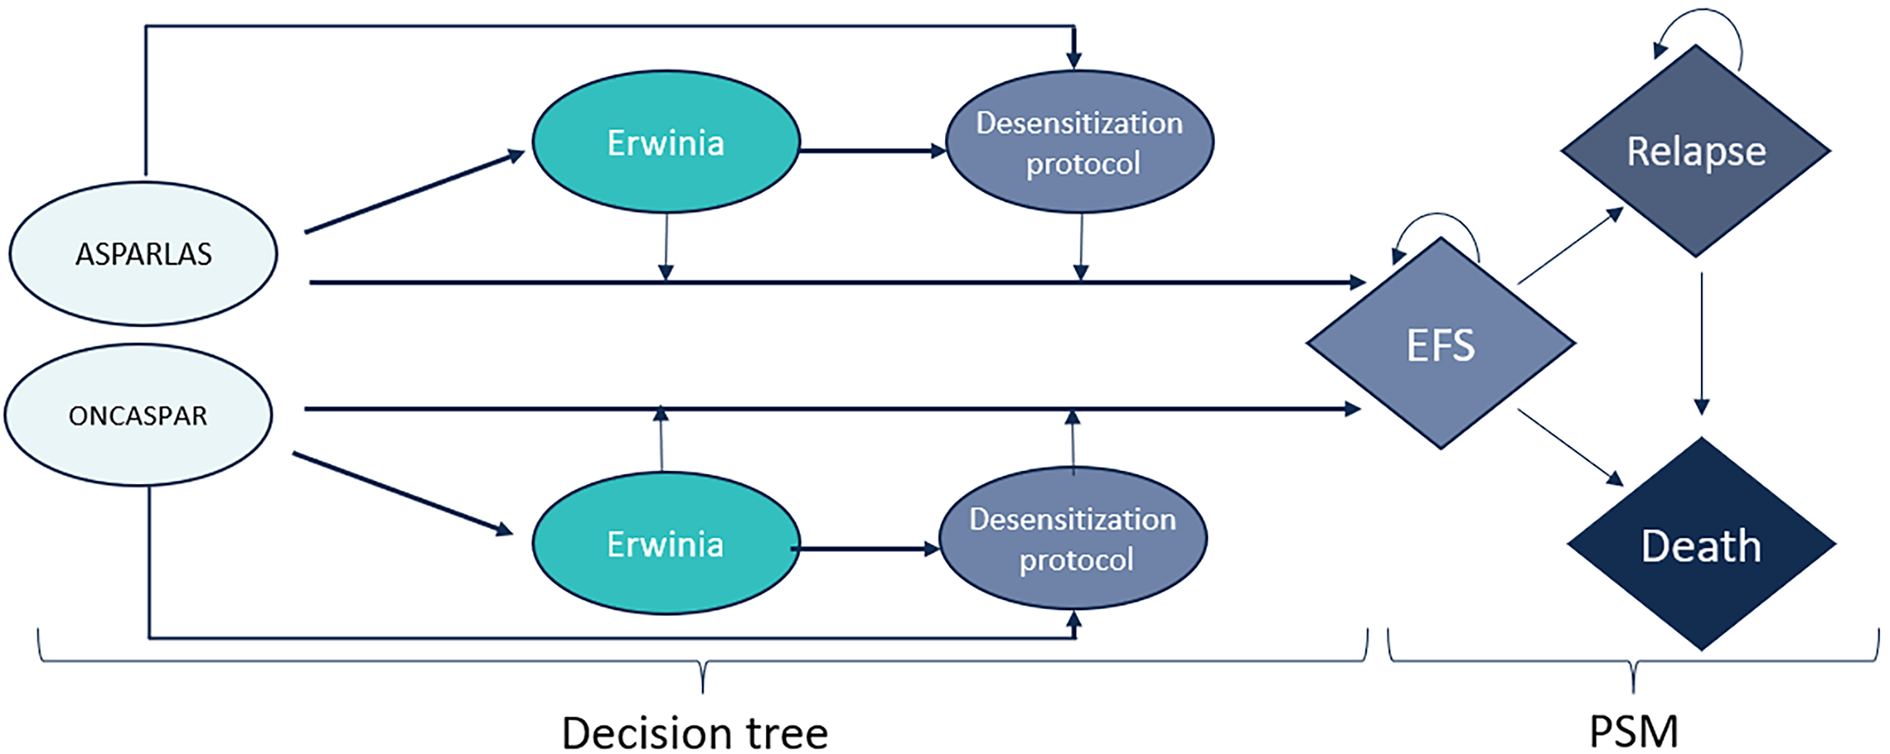 Depicts the sponsor’s model structure, where people on treatment go through the Erwinia asparaginase phase and desensitization protocol in the decision-tree, to enter the partitioned survival model in event-free survival. A person can remain in the event-free survival state or experience relapse or death. Once a person experiences relapse, they can remain in the relapse state or die.